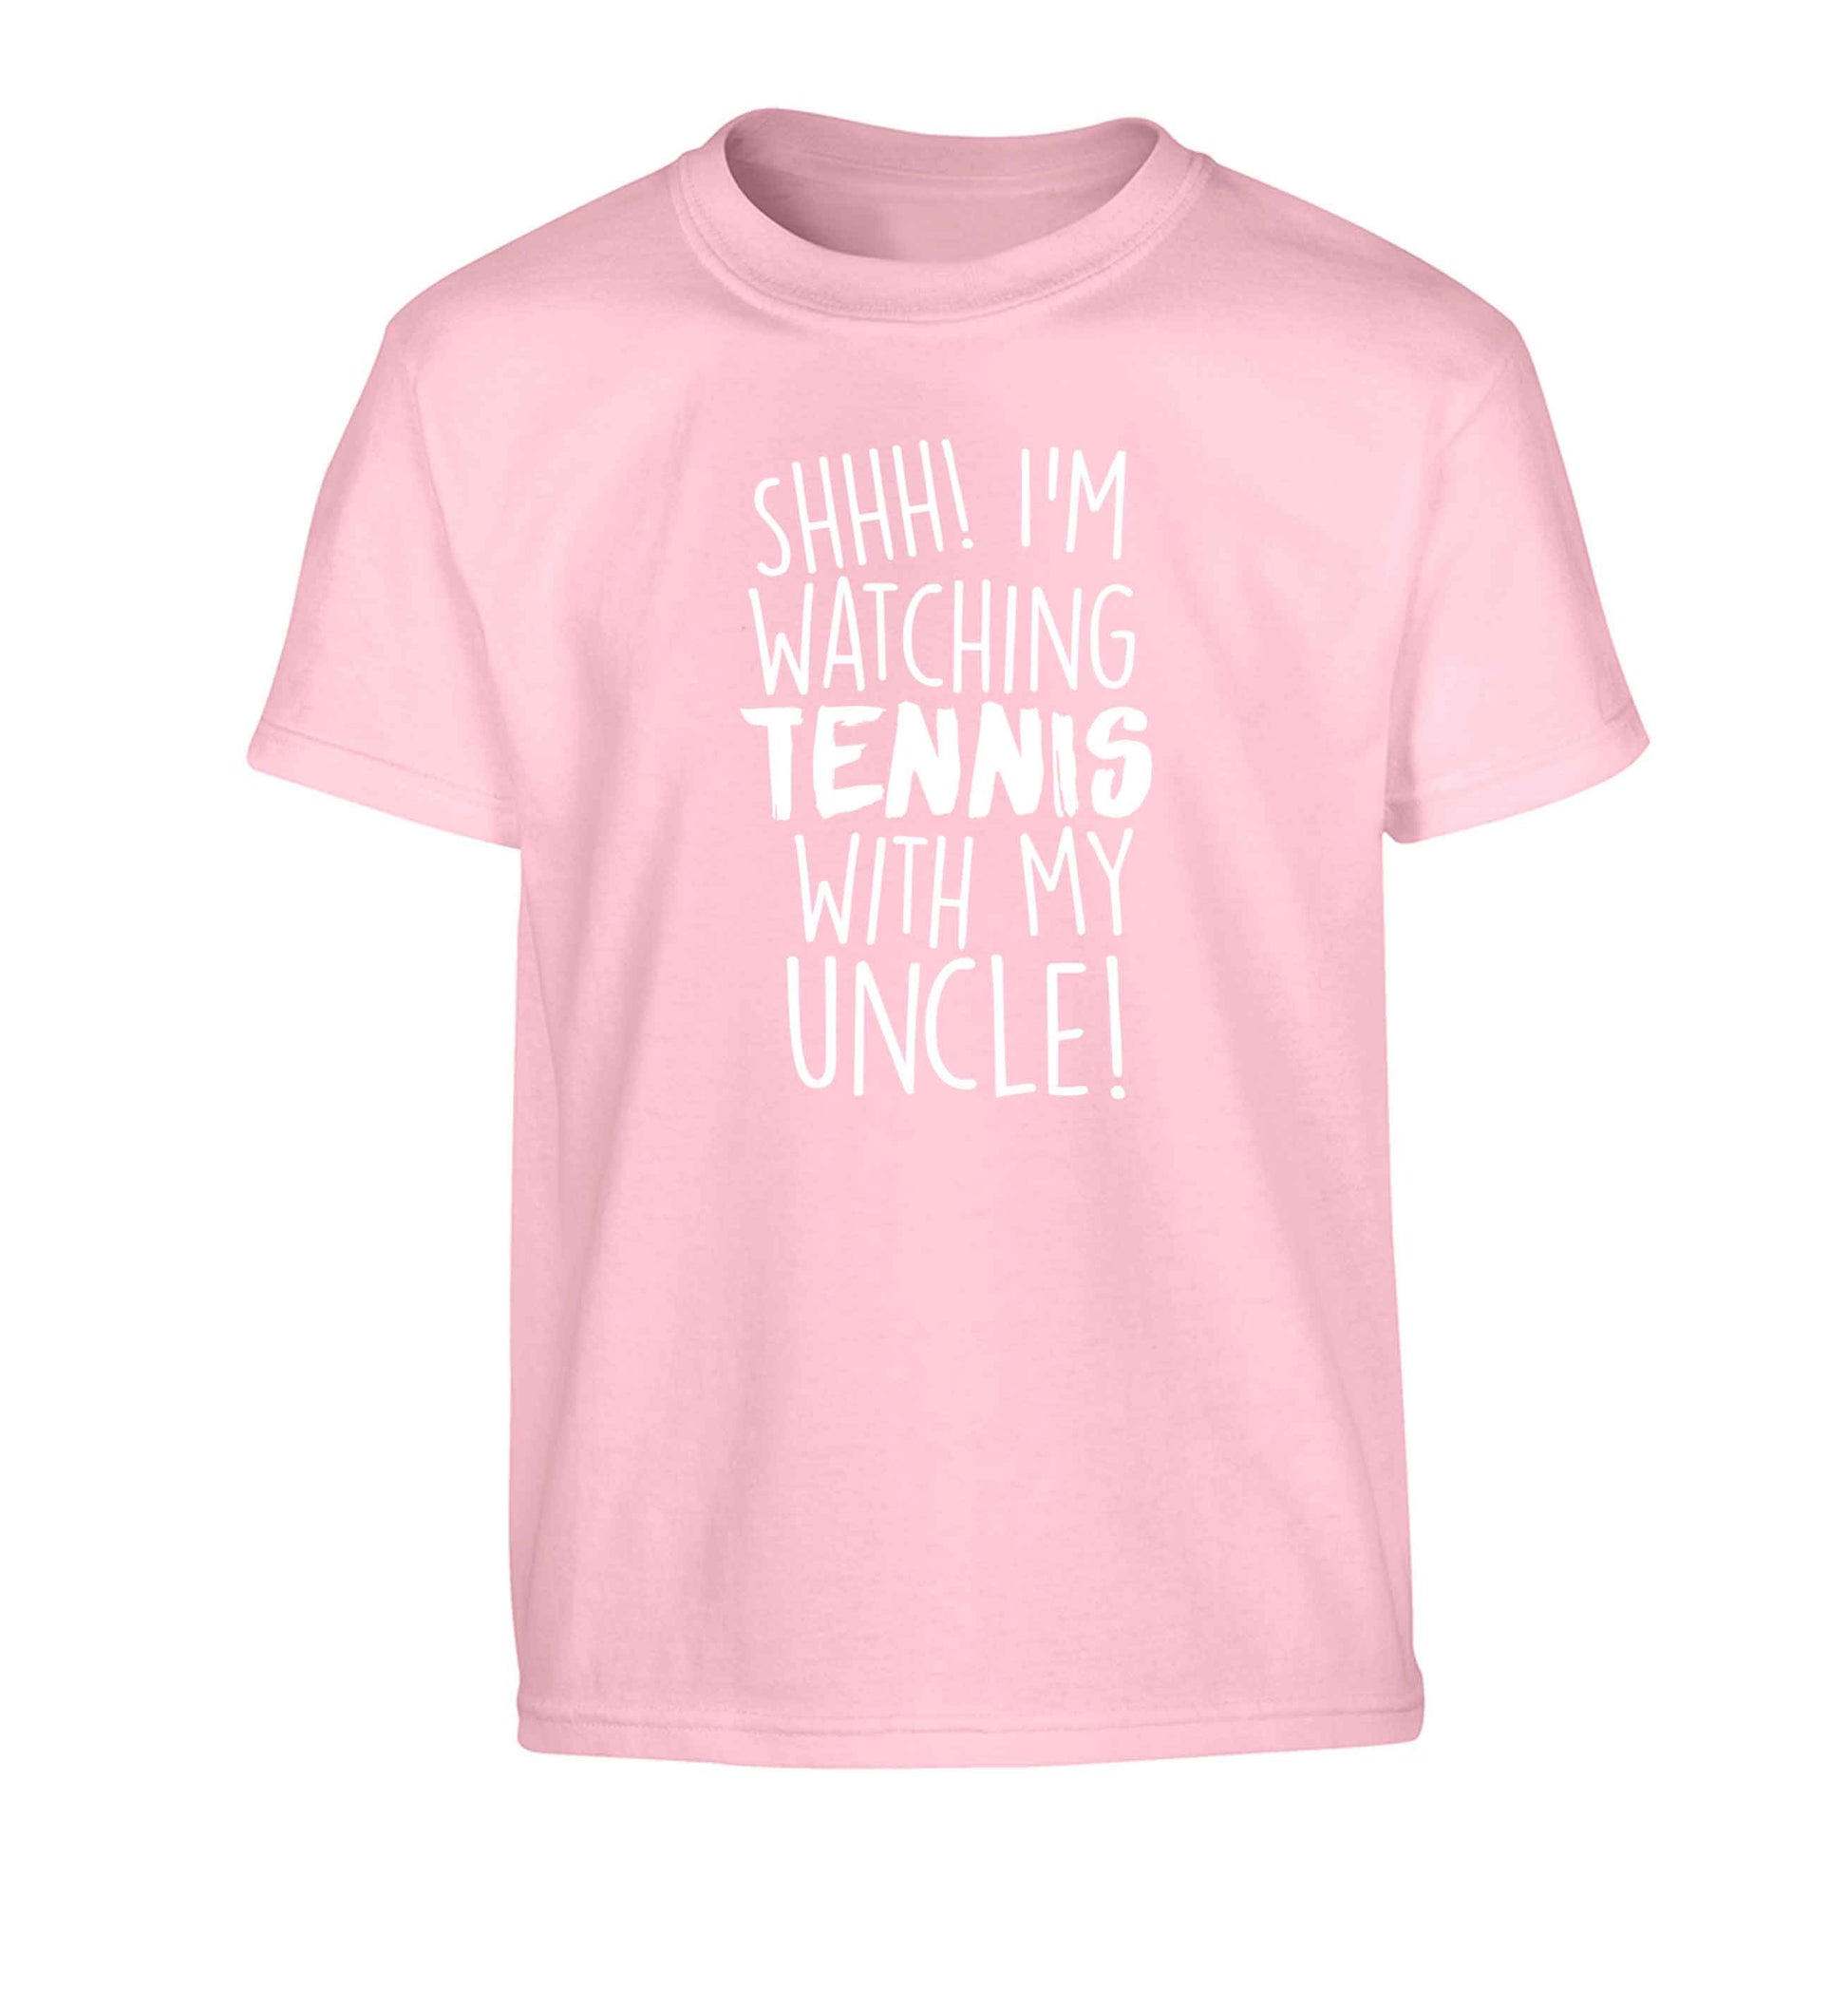 Shh! I'm watching tennis with my uncle! Children's light pink Tshirt 12-13 Years